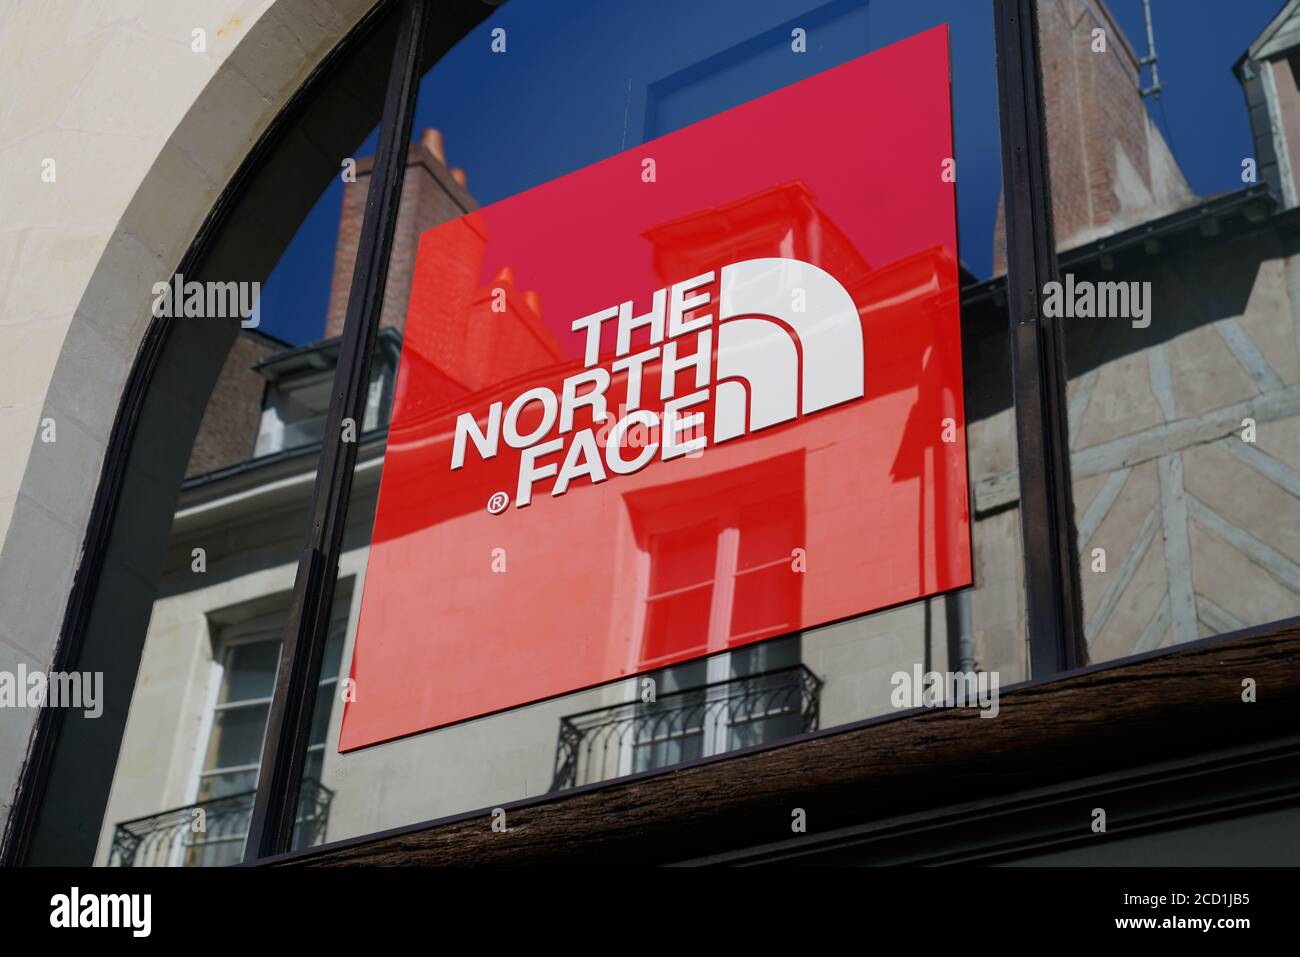 The North Face Clothing Shop High Resolution Stock Photography and Images -  Alamy